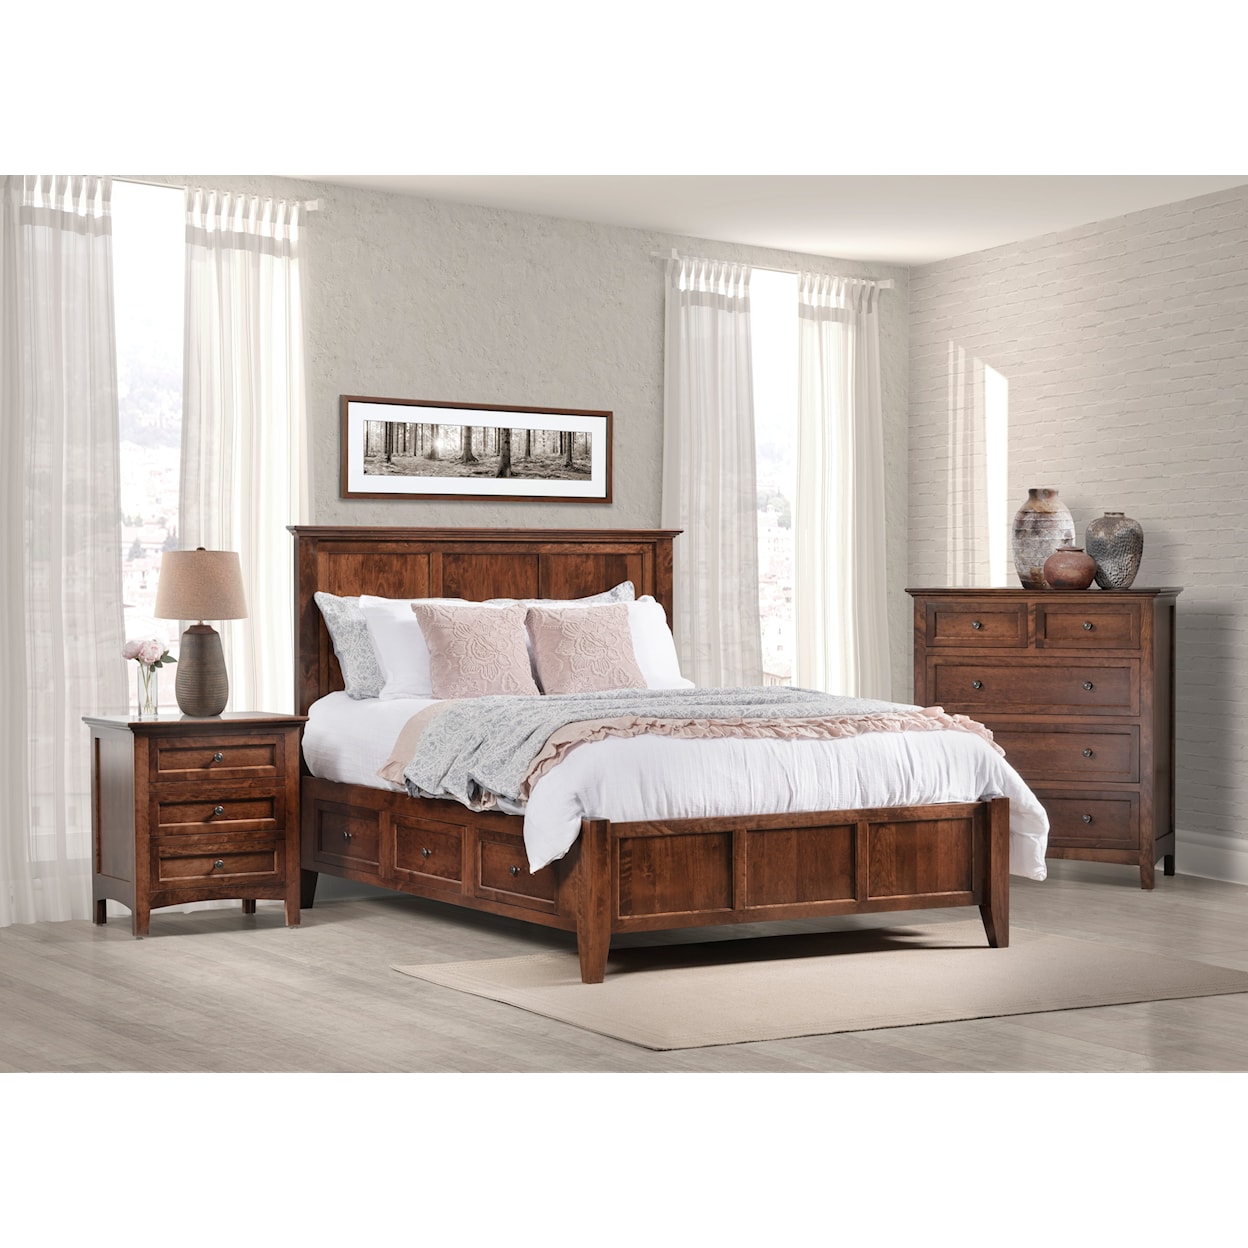 Millcraft Albany 3-Piece California King Bedroom Group